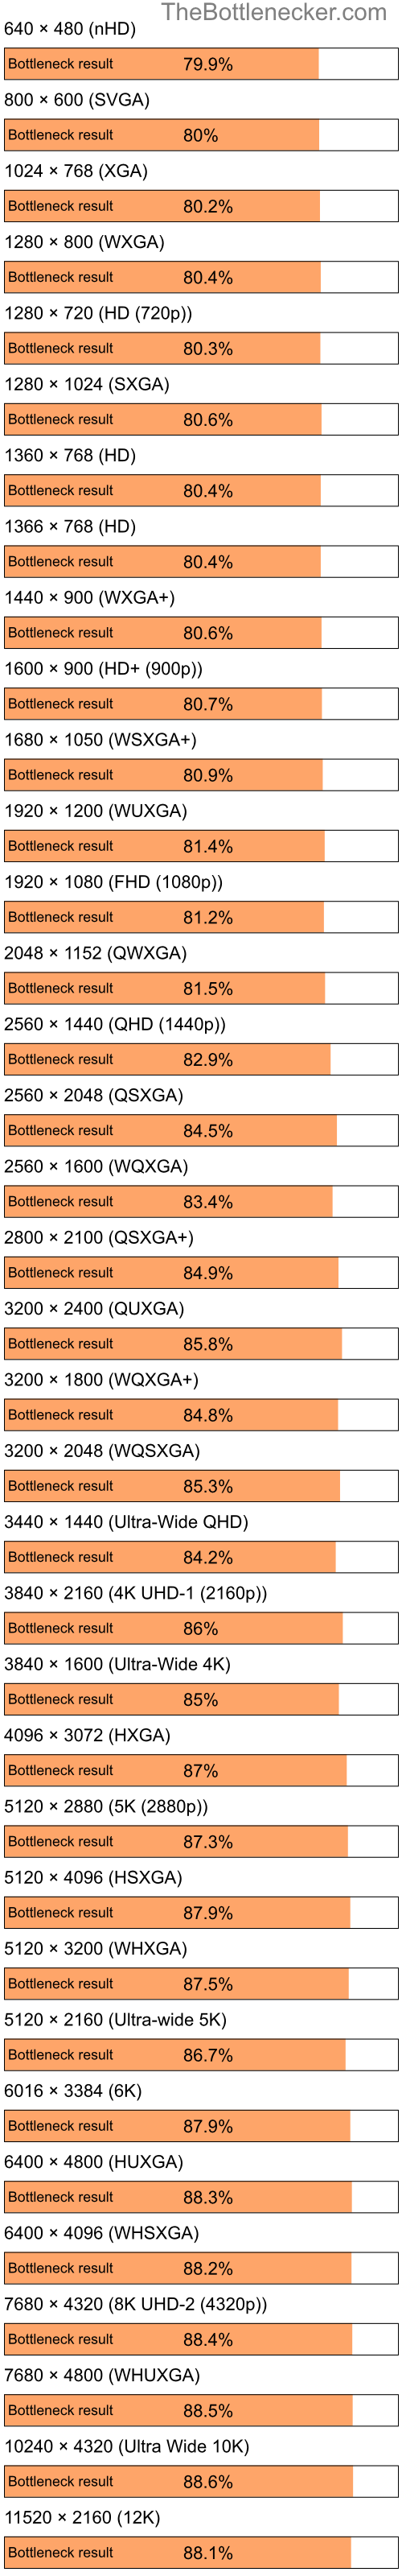 Bottleneck results by resolution for Intel Celeron and NVIDIA nForce 620i in Graphic Card Intense Tasks